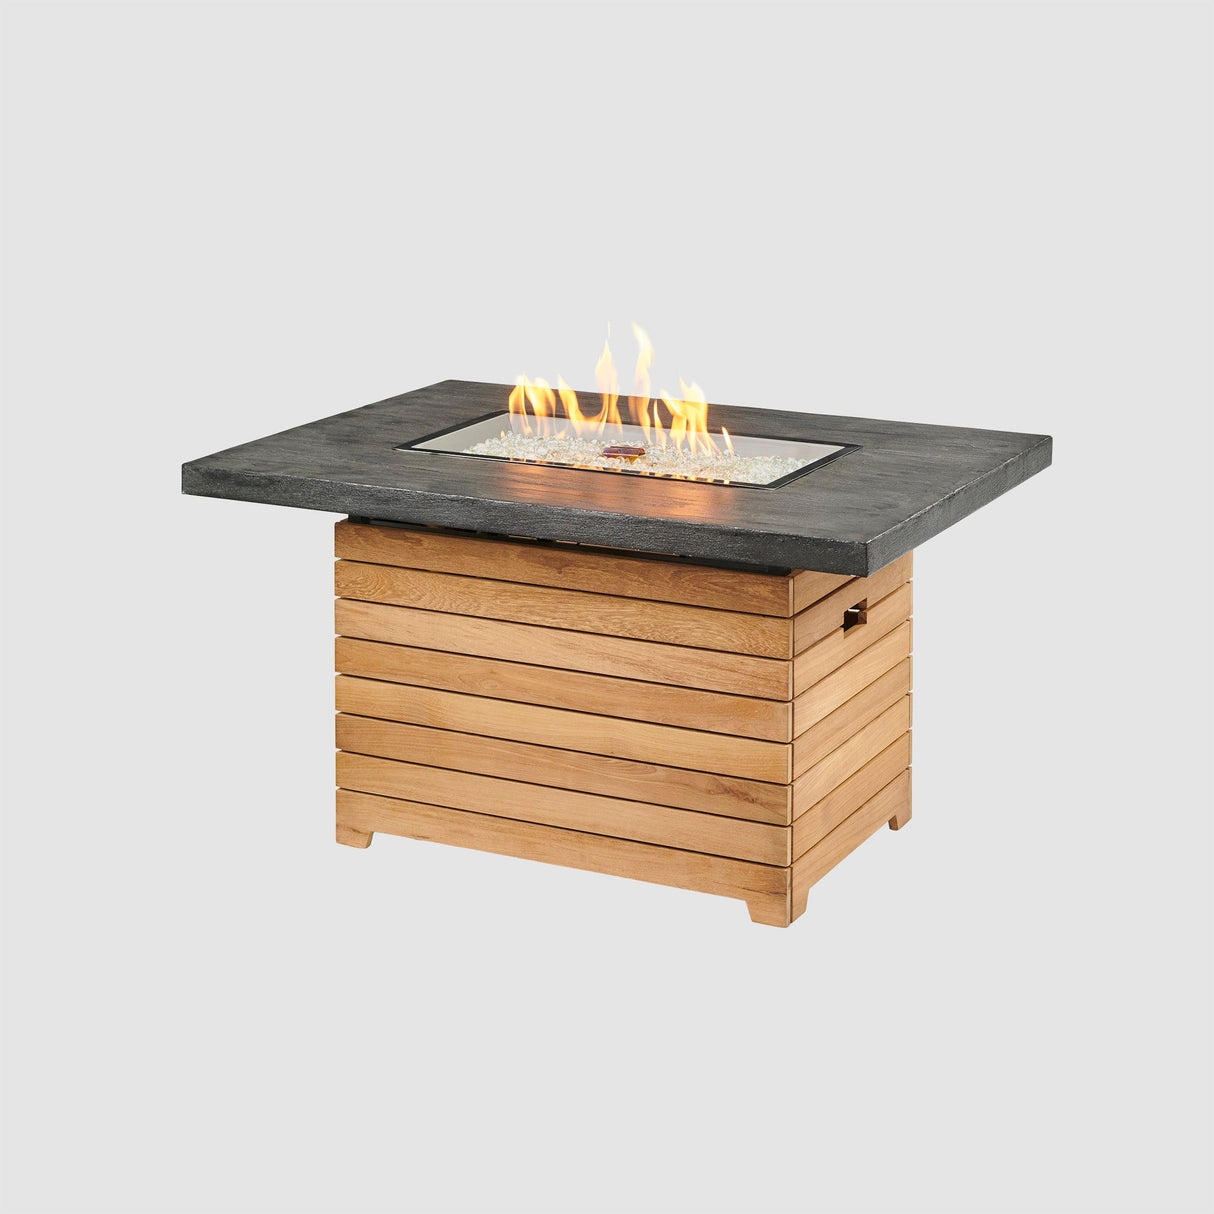 Darien Rectangular Gas Fire Pit Table with an Everblend top on a grey background